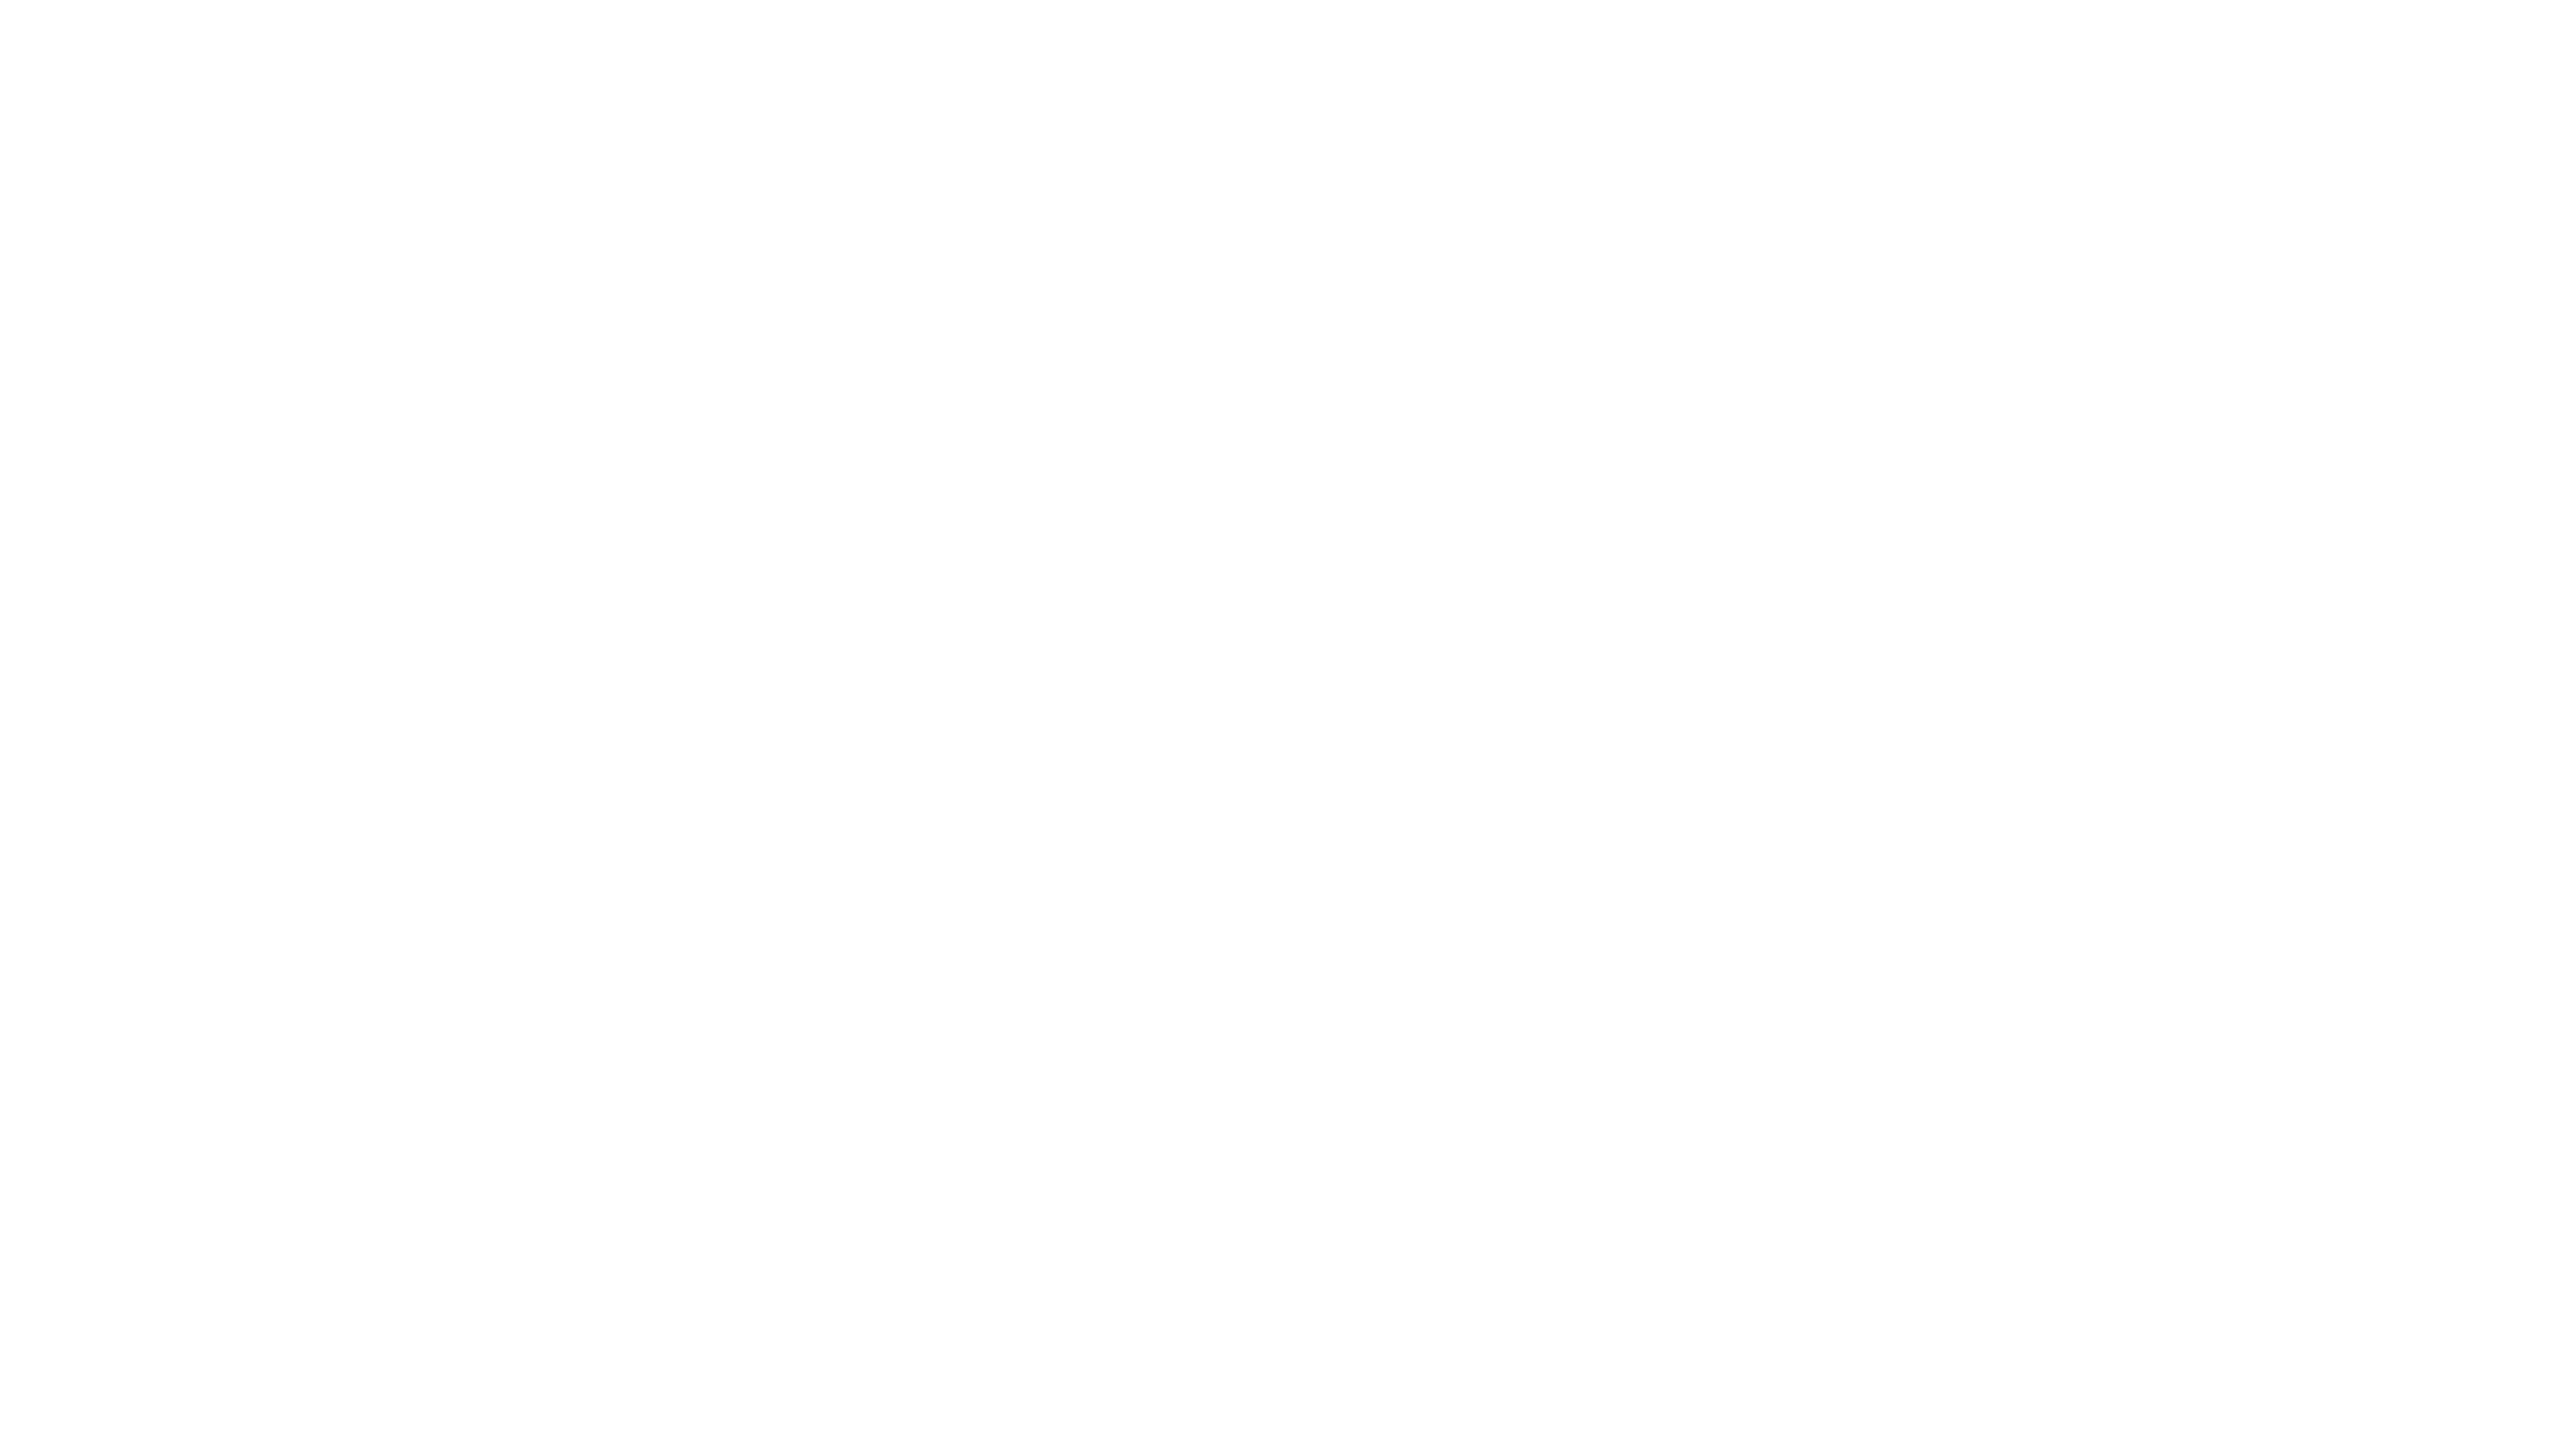 The James Room